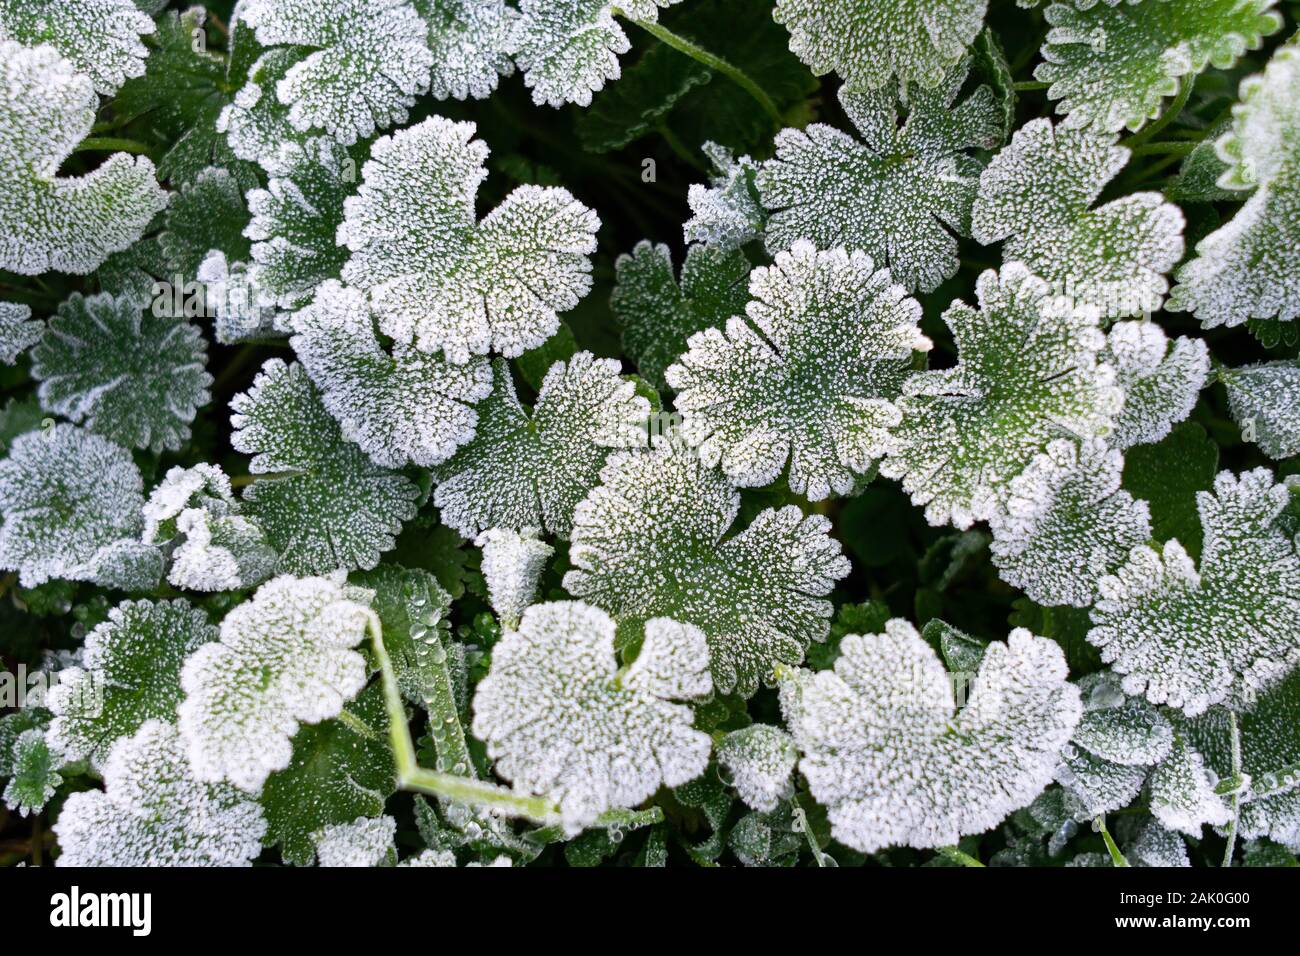 Winter nature background. Green leaves covered with white hoar frost and ice crystal formation Stock Photo